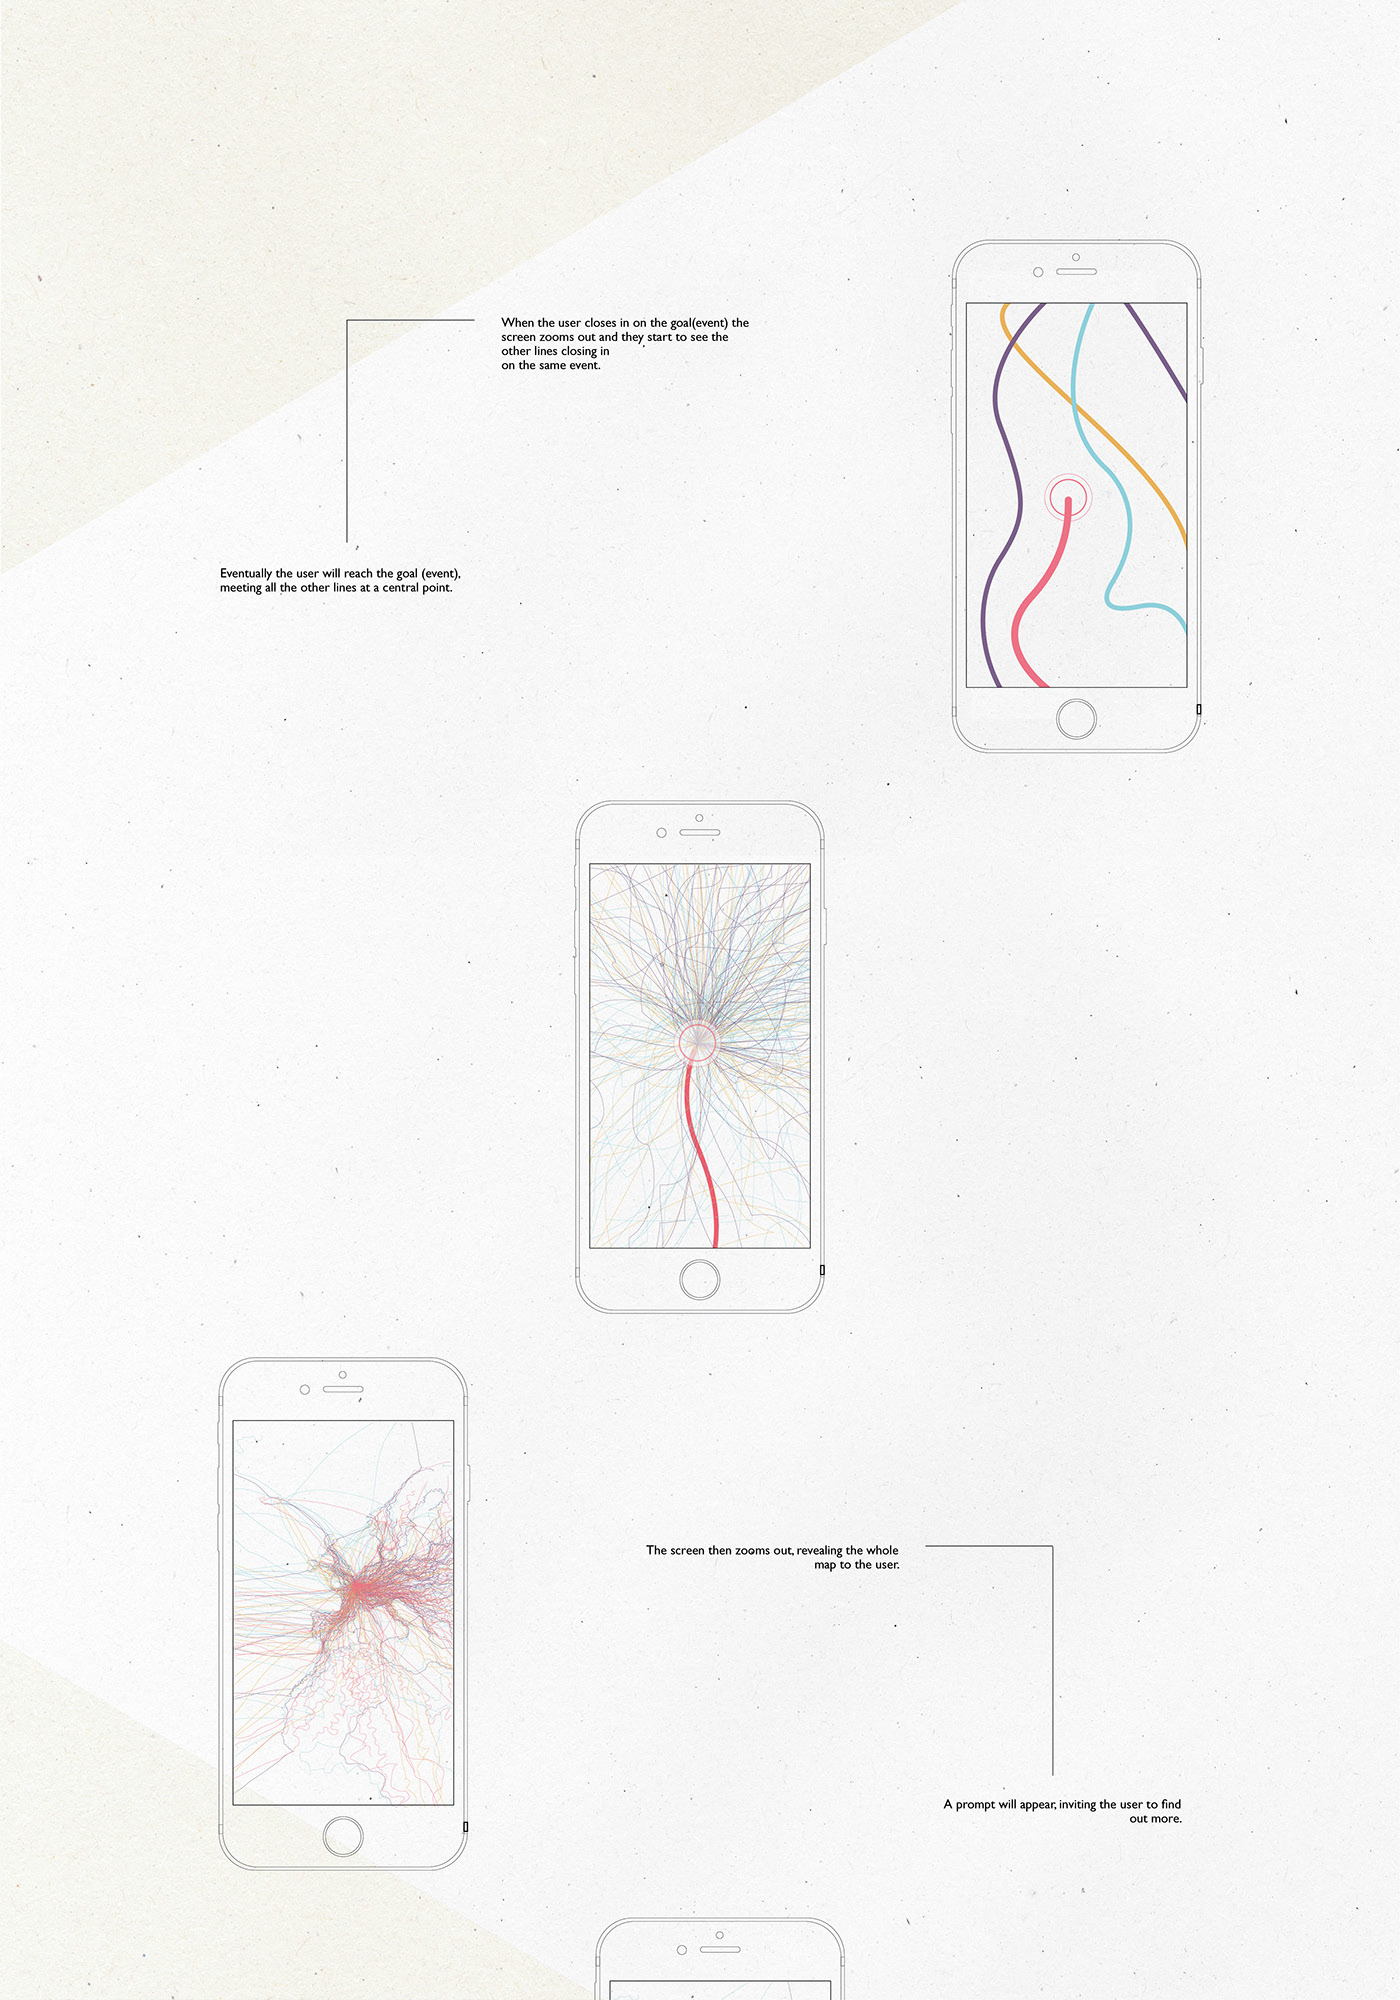 app Web poster identity brand minimalistic color editorial interaction texture Mockup experimental type Layout minimal